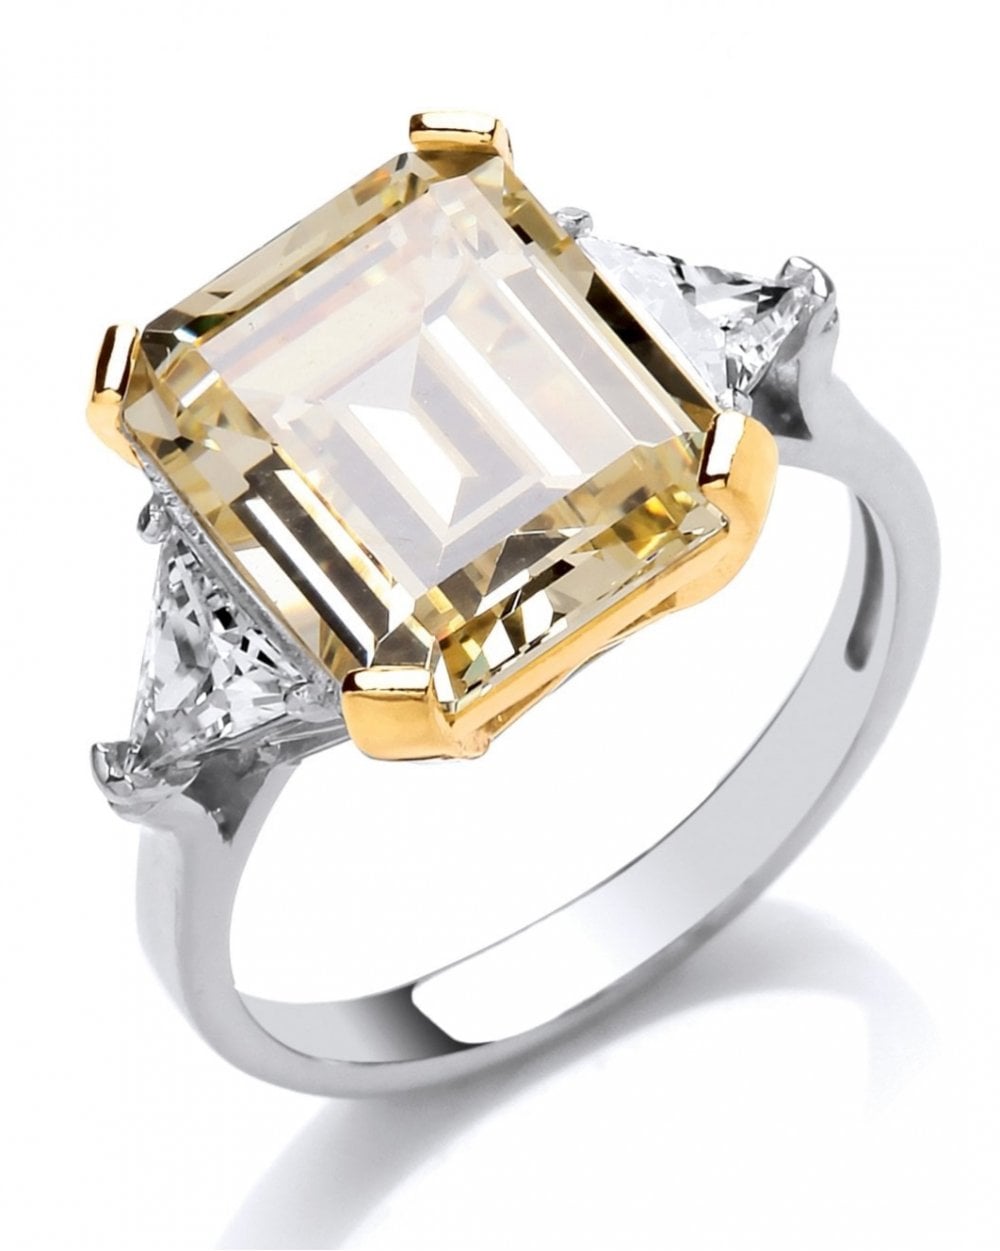 Silver & Citrine Cubic Zirconia Vintage Style Ring